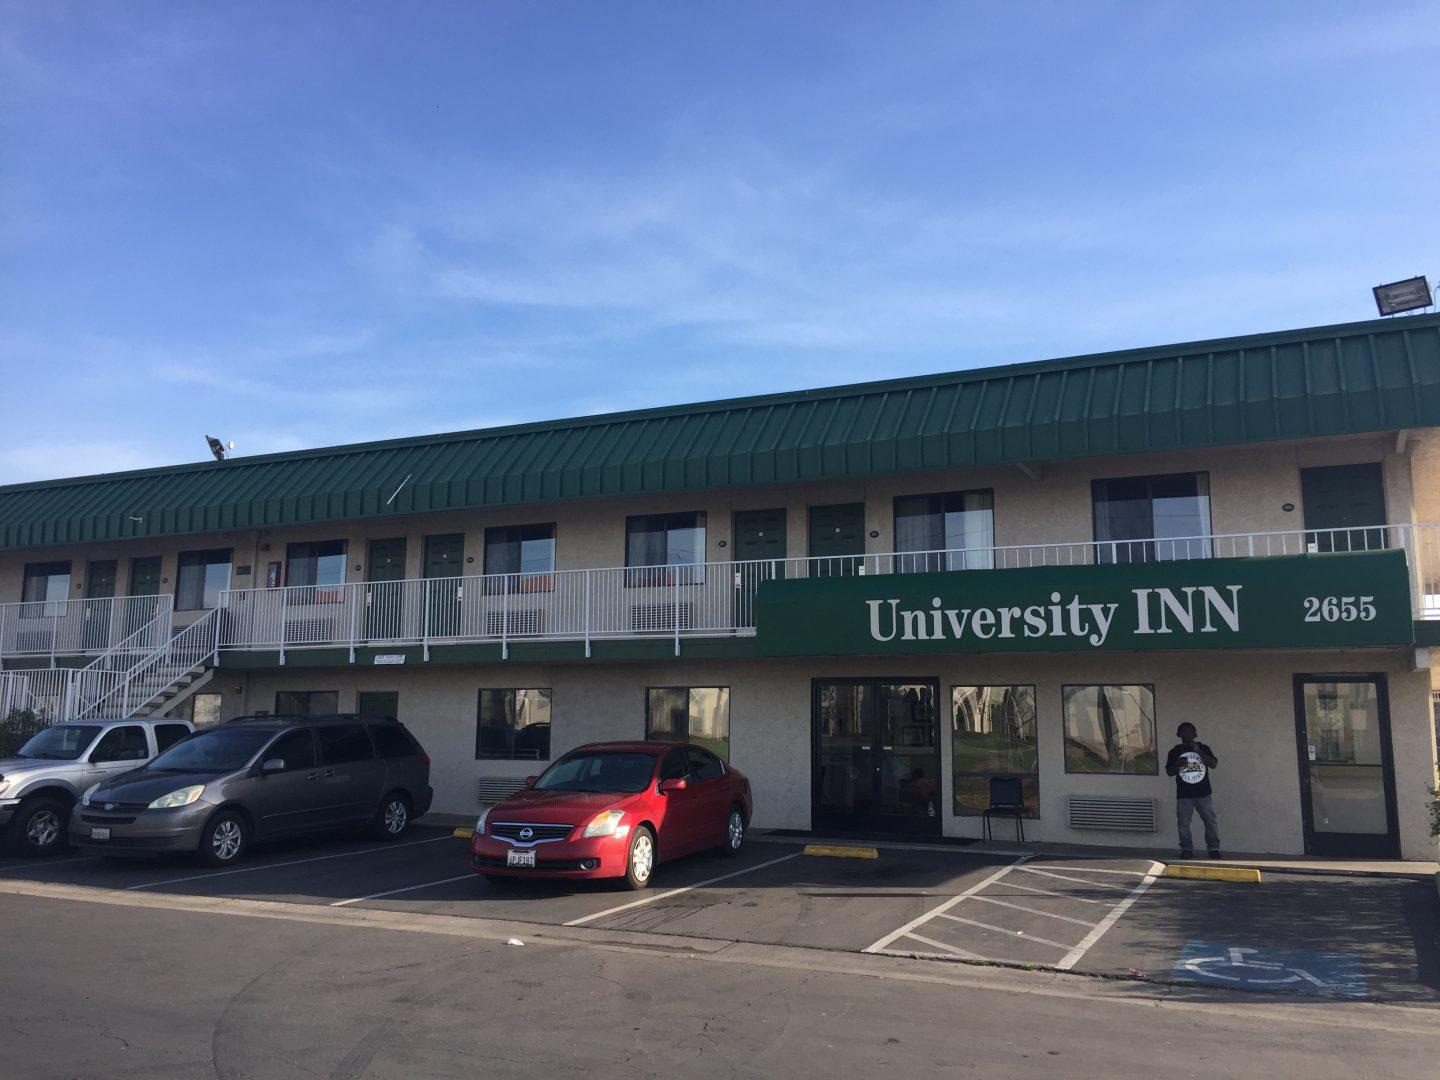 Four people were arrested Tuesday, March 6, 2018, at the University Inn across from the Fresno State campus. Police said weapons and narcotics were found. (Bineet Kaur/The Collegian)